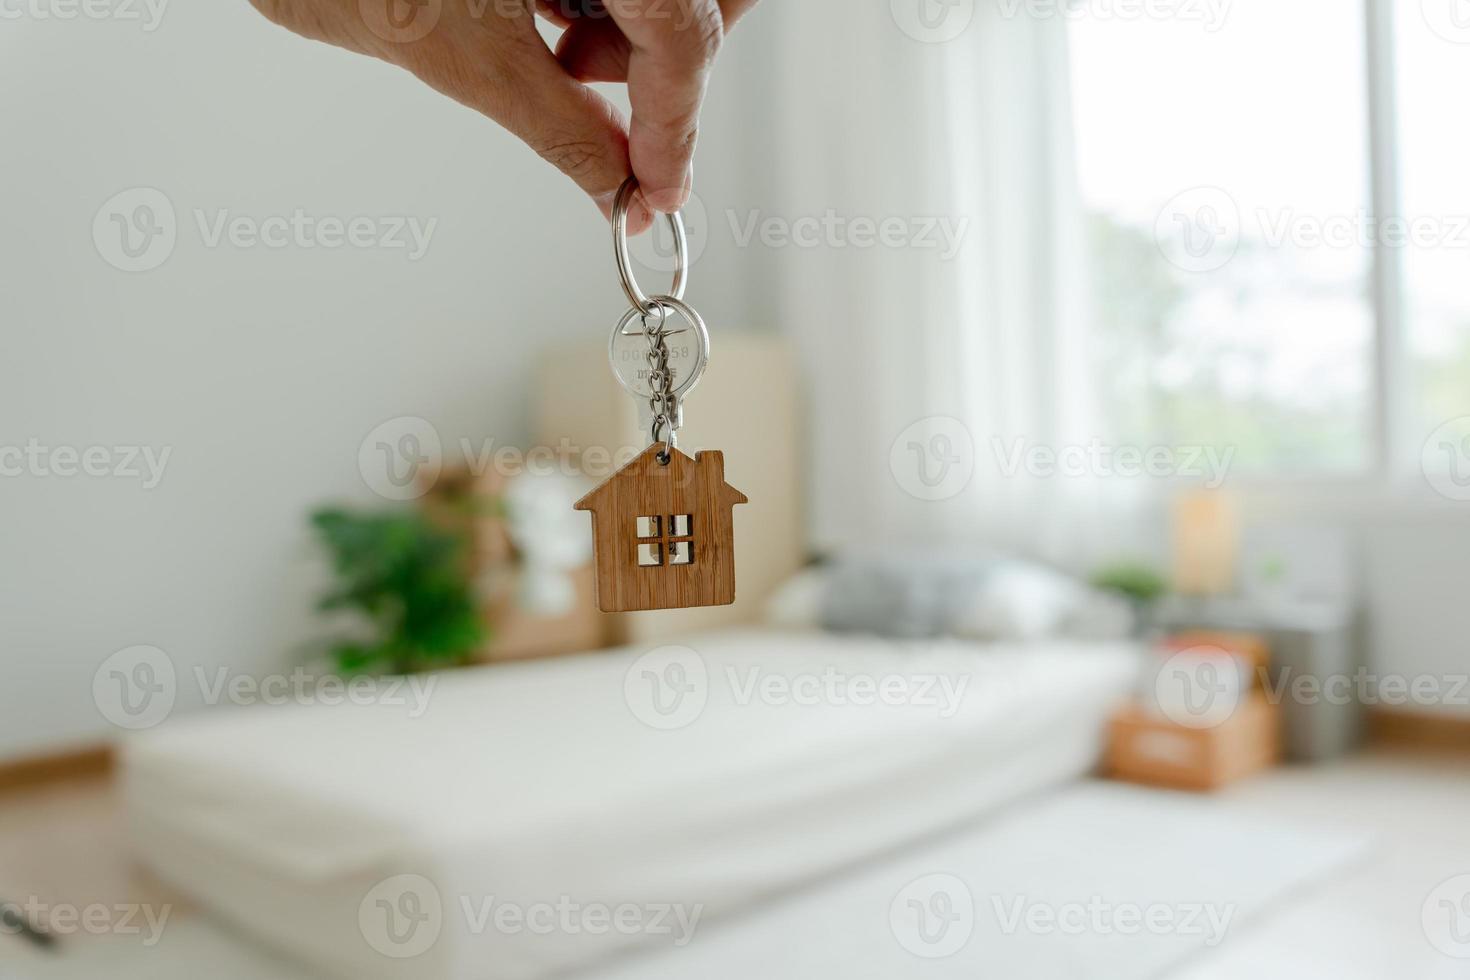 Moving house, relocation. The key was inserted into the door of the new house, inside the room was a cardboard box containing personal belongings and furniture. move in the apartment or condominium photo